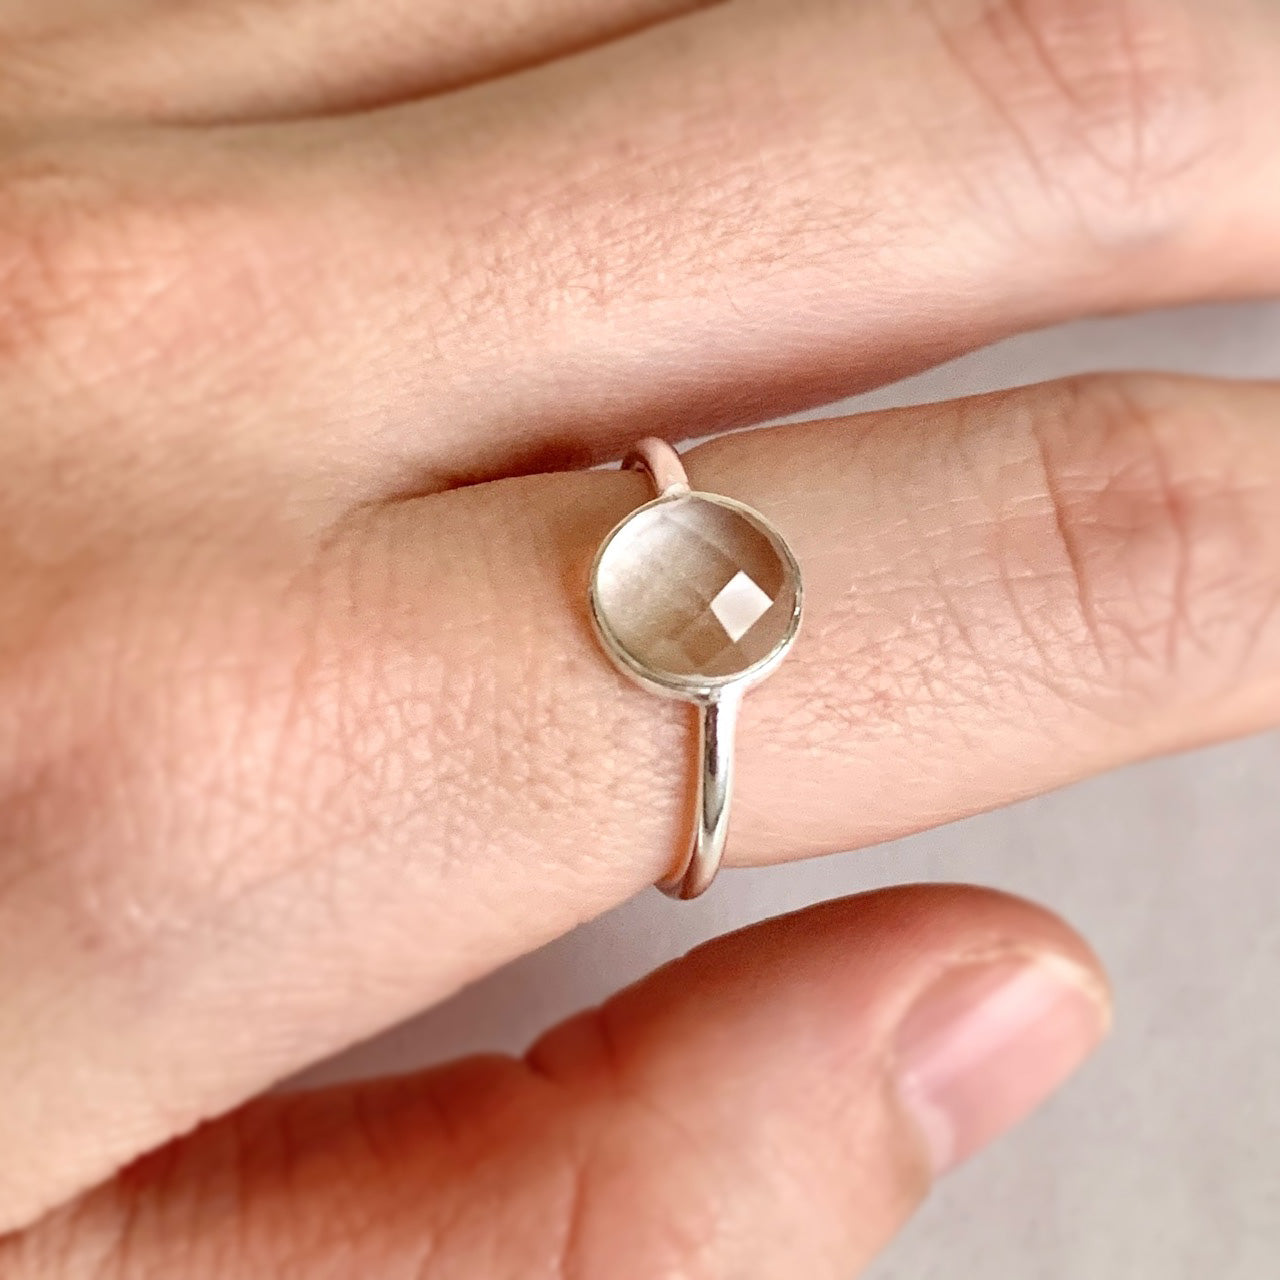 Clear Quartz Ring, Sterling Silver